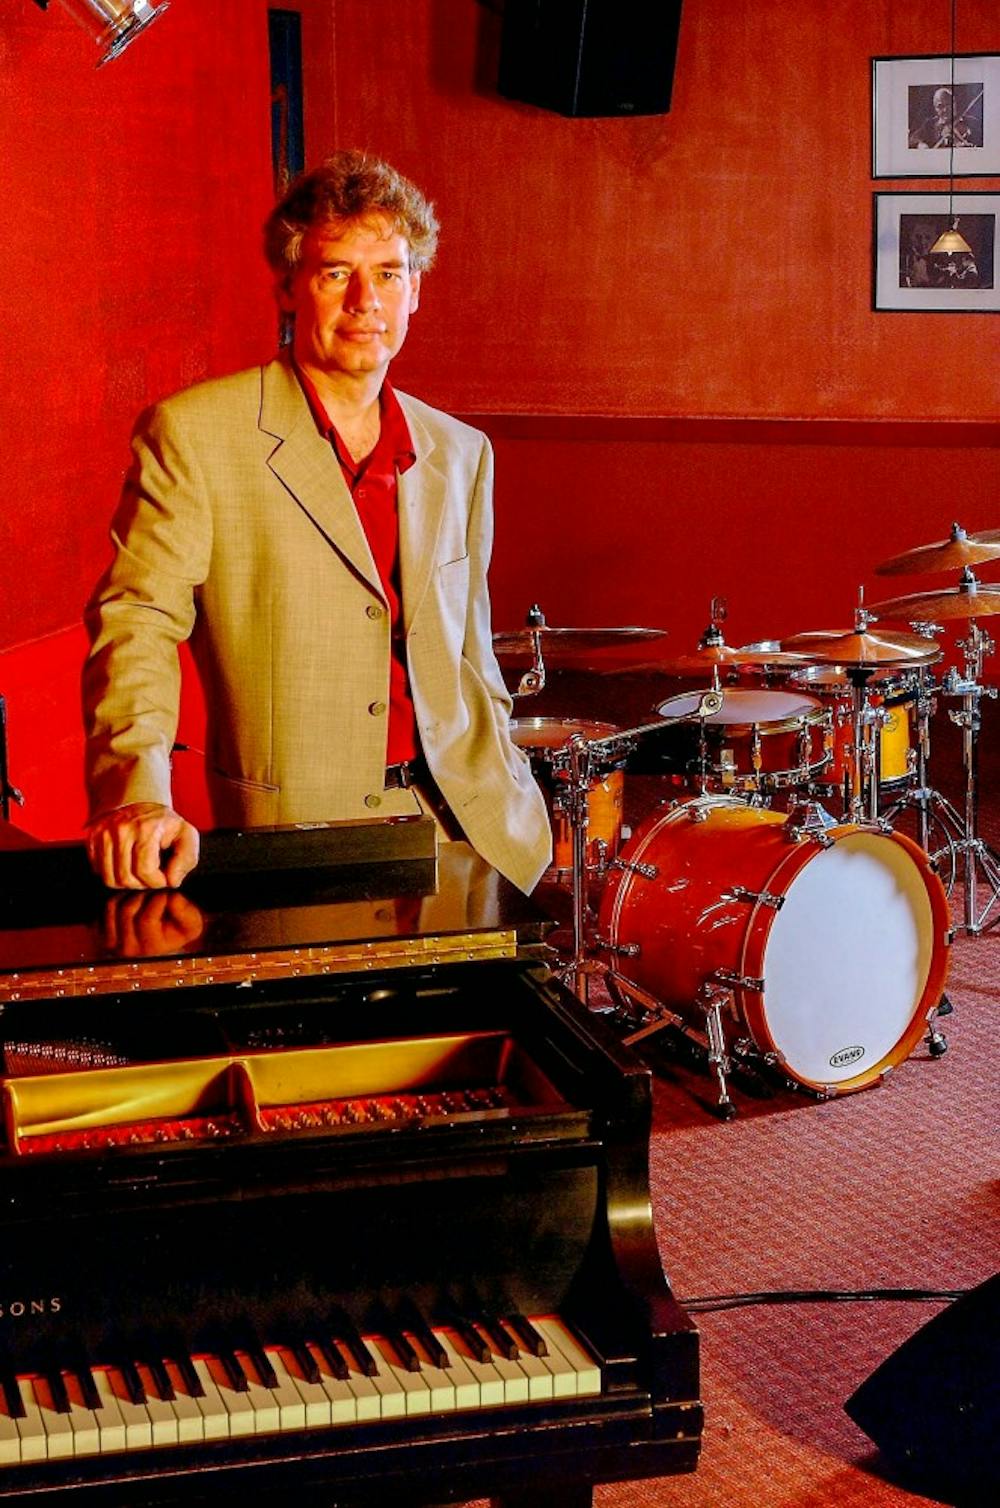 <p>Former Yes and King Crimson drummer Bill Bruford spoke with The Spectrum on Monday ahead of his lecture series in support of his second book, “Uncharted: Creativity and the Expert Drummer.”</p>